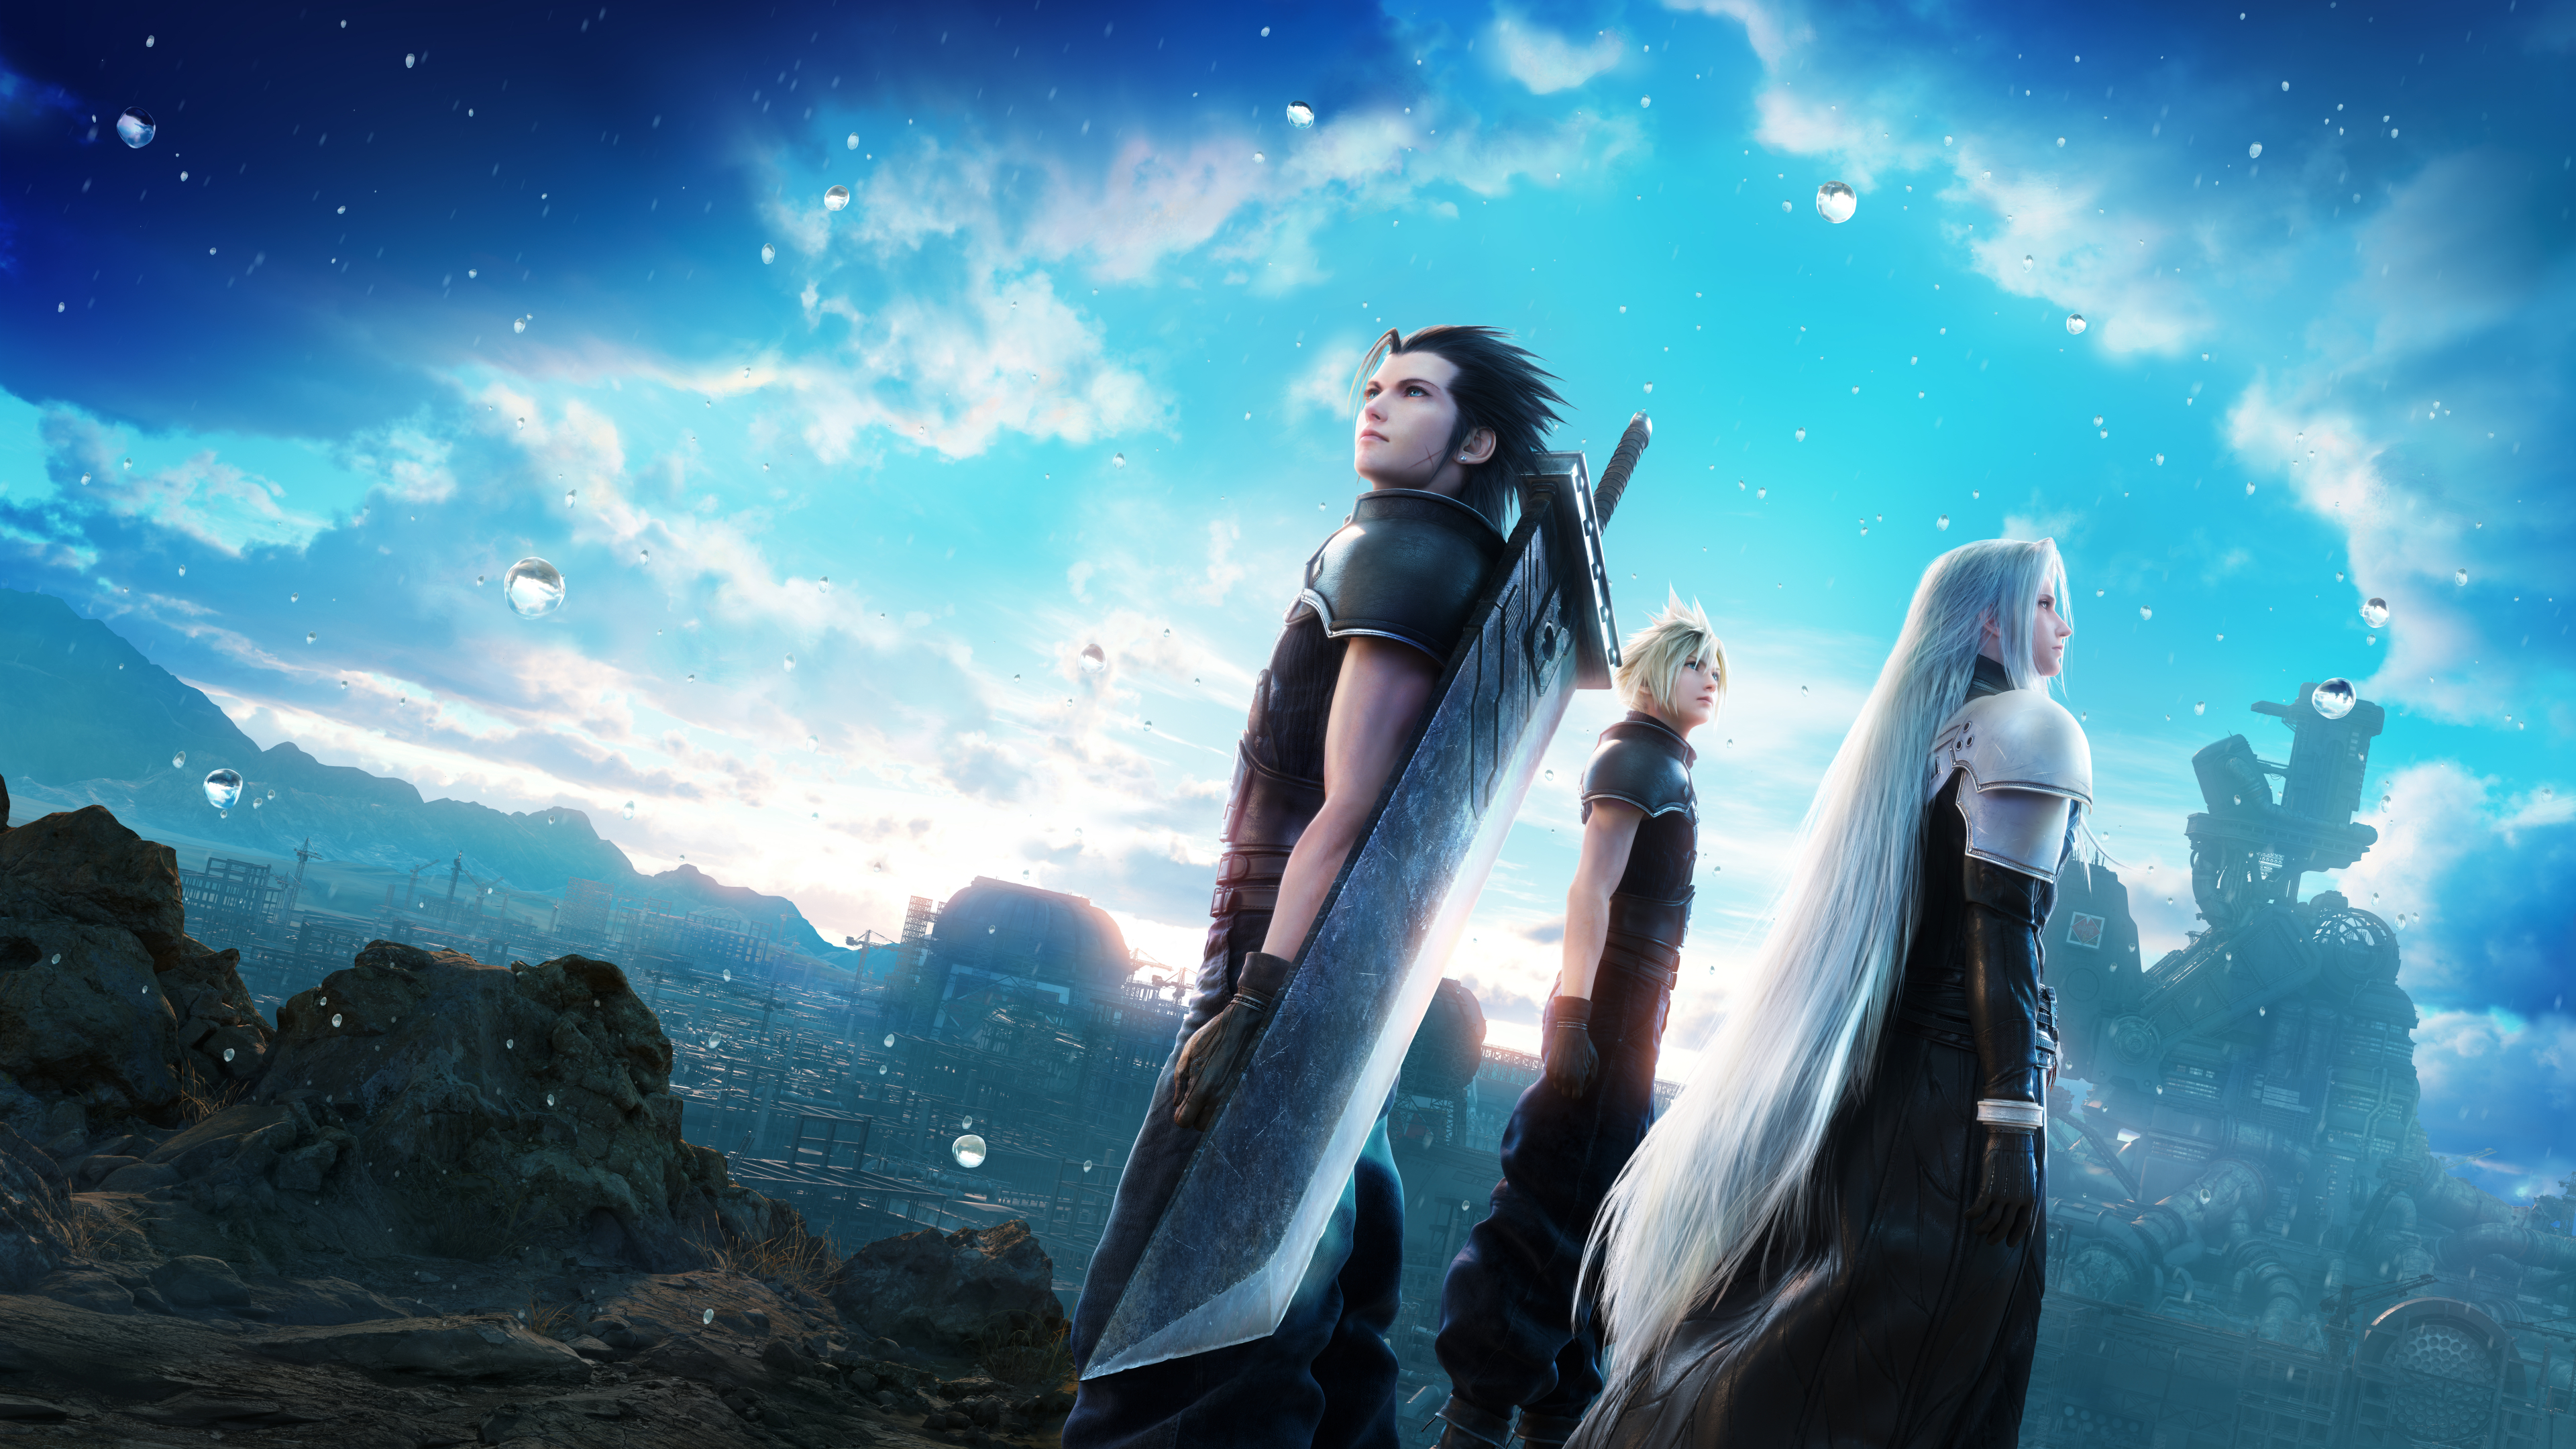 Final Fantasy Vii Zack Fair Cloud Strife Sephiroth Video Games Video Game Art Video Game Characters  3840x2160